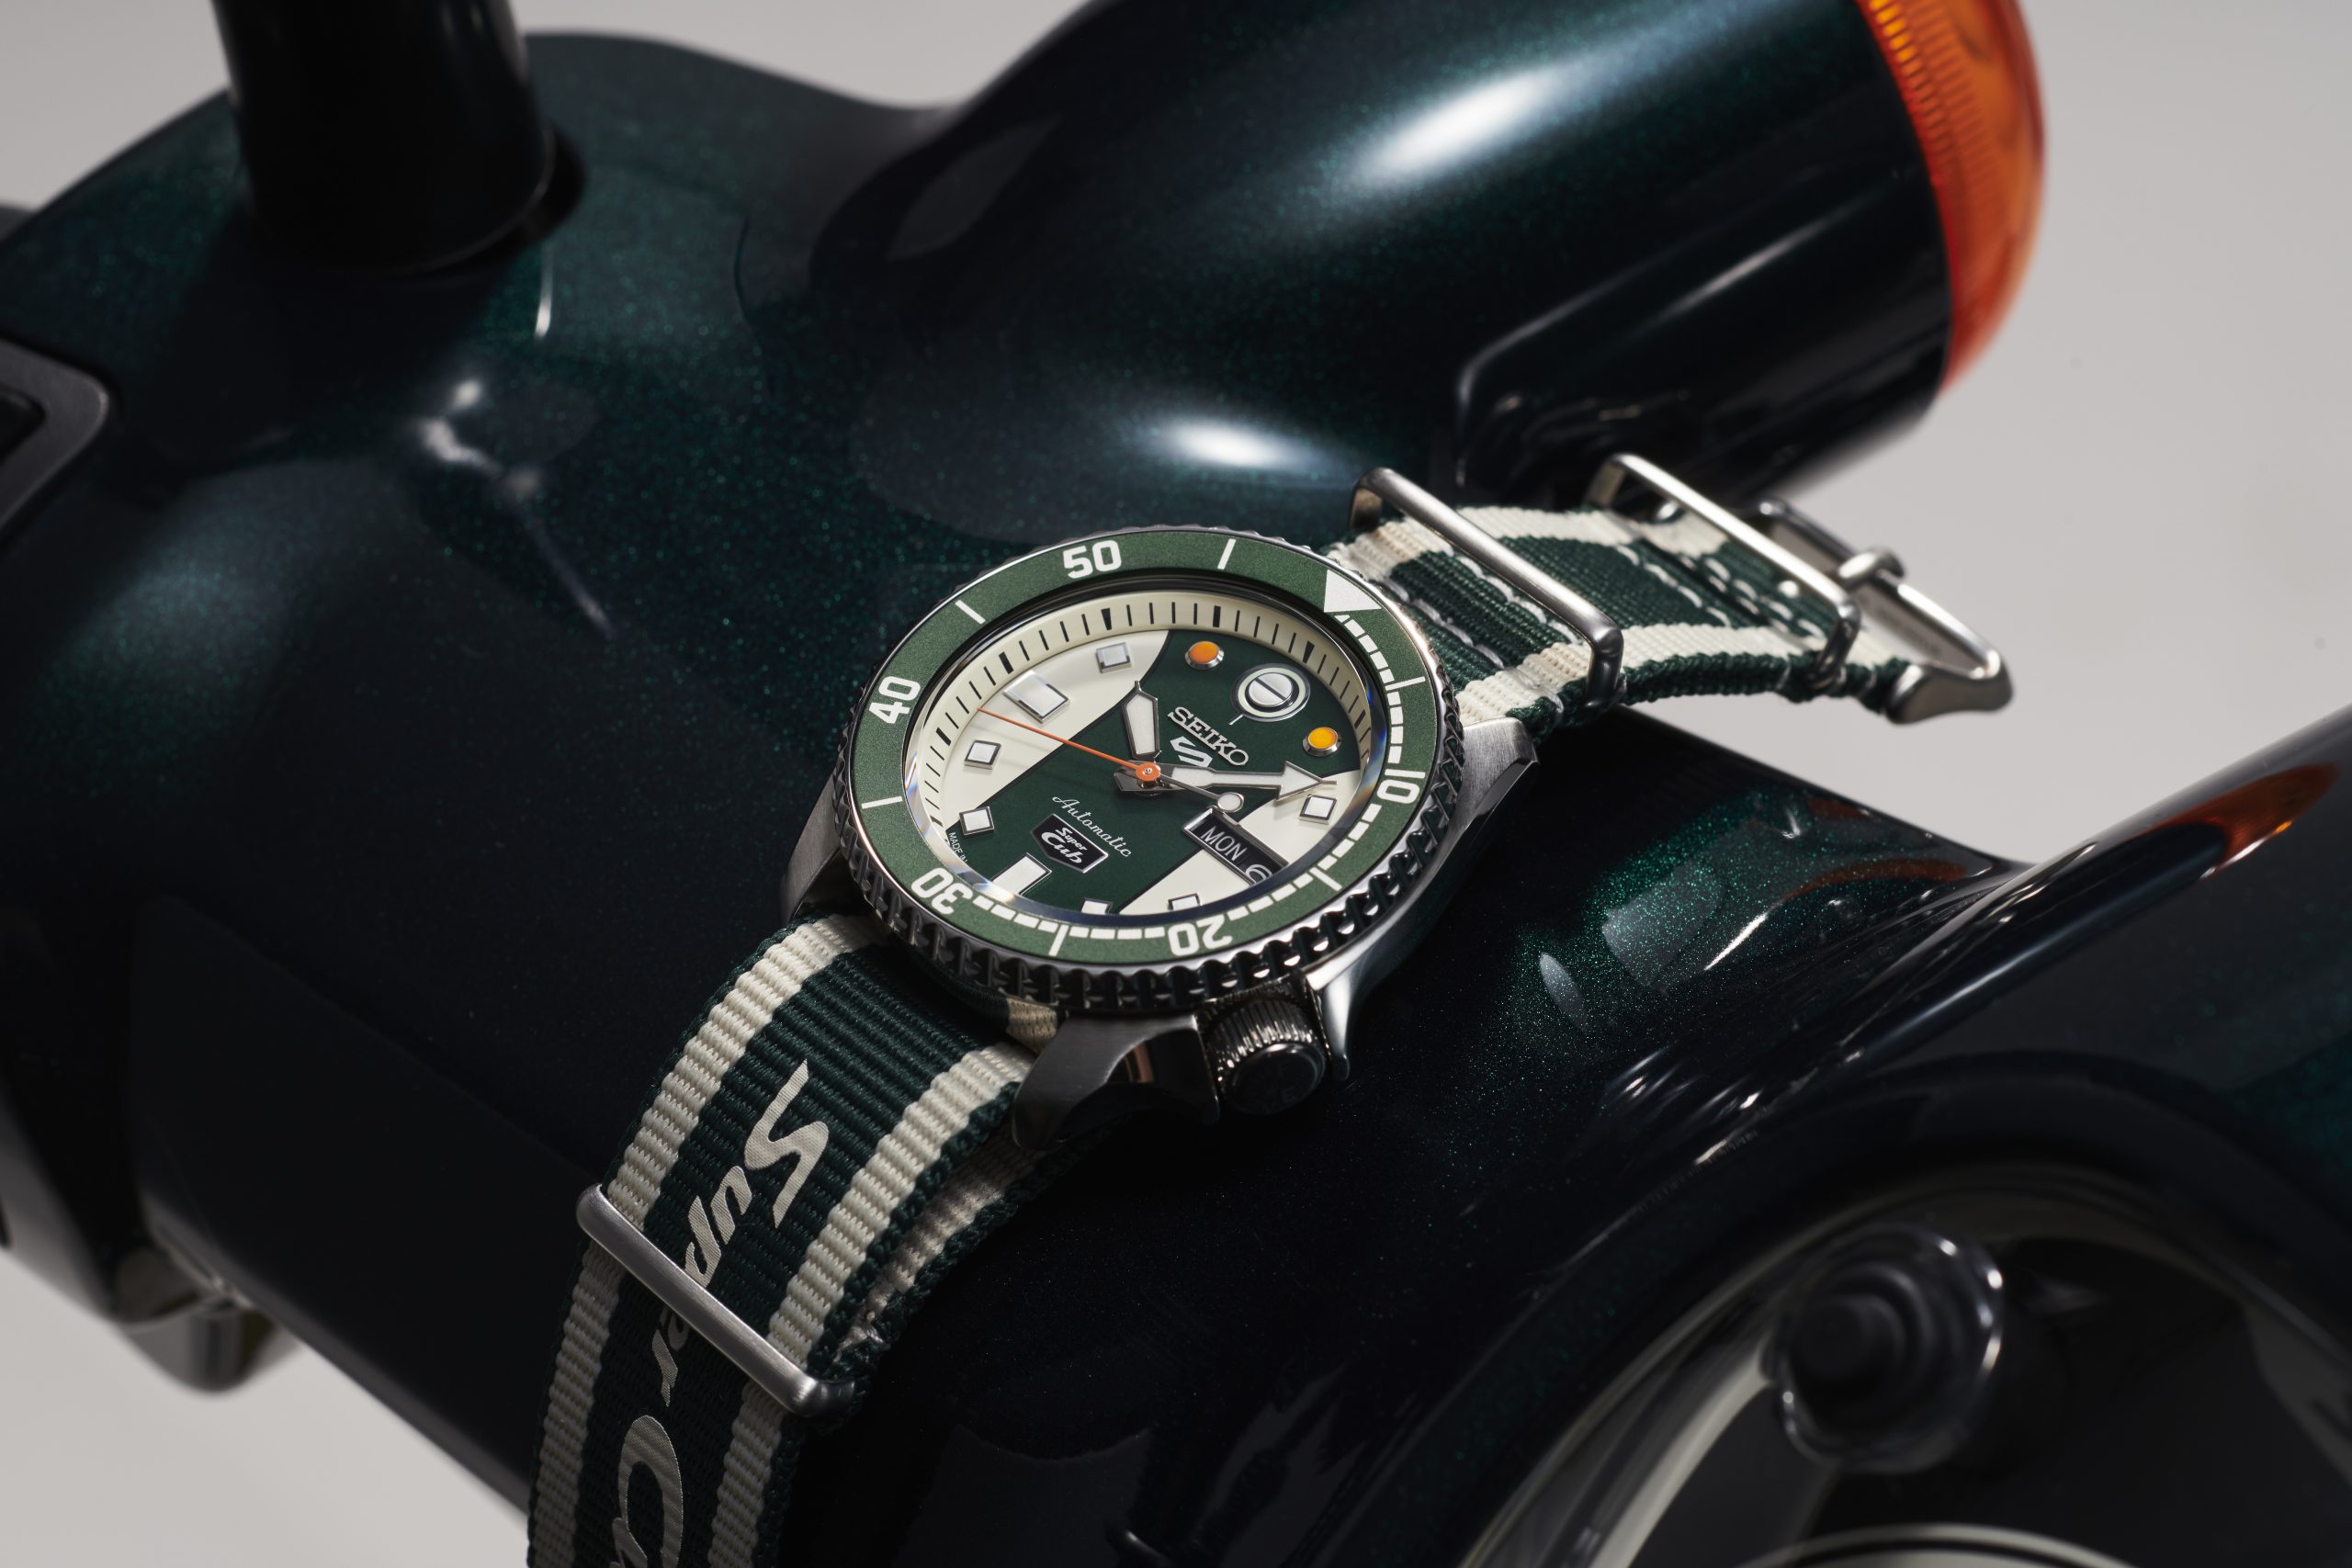 Seiko watch pays homage to iconic Honda Super Cub motorcycle